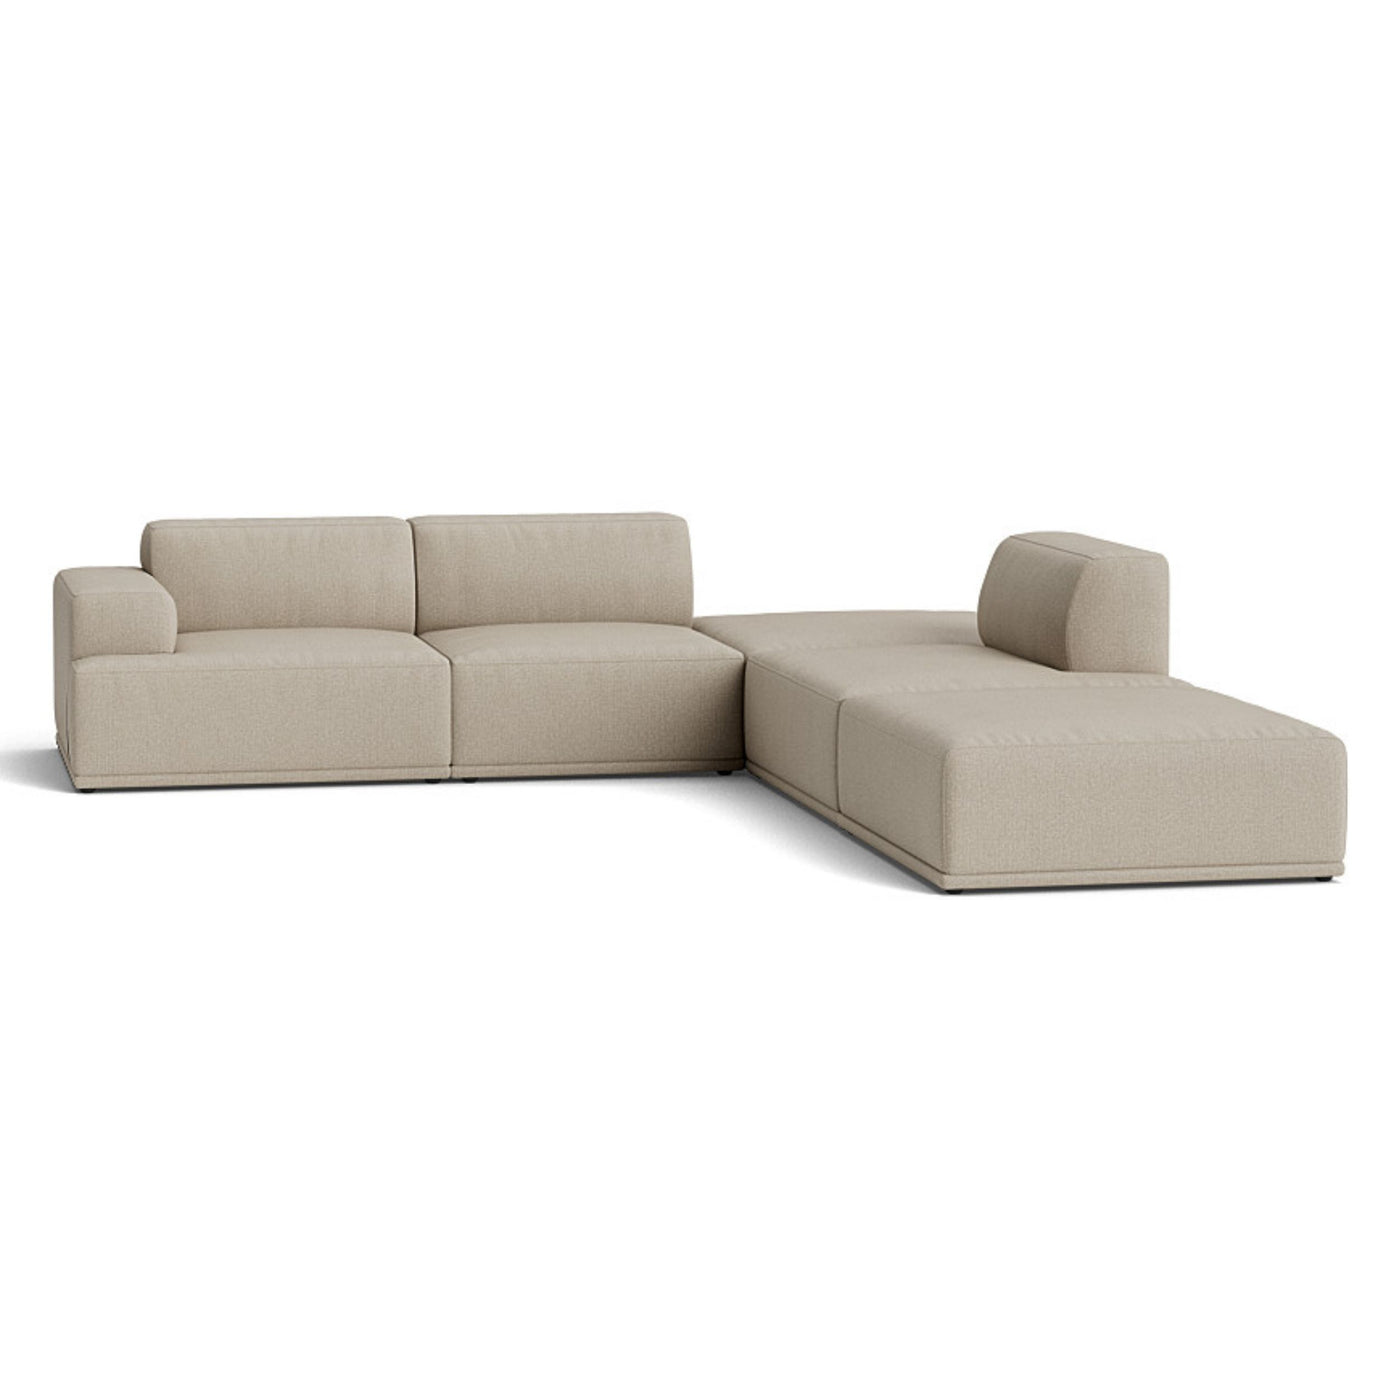 Muuto Connect Soft Modular Corner Sofa, configuration 3. made-to-order from someday designs. #colour_clay-10